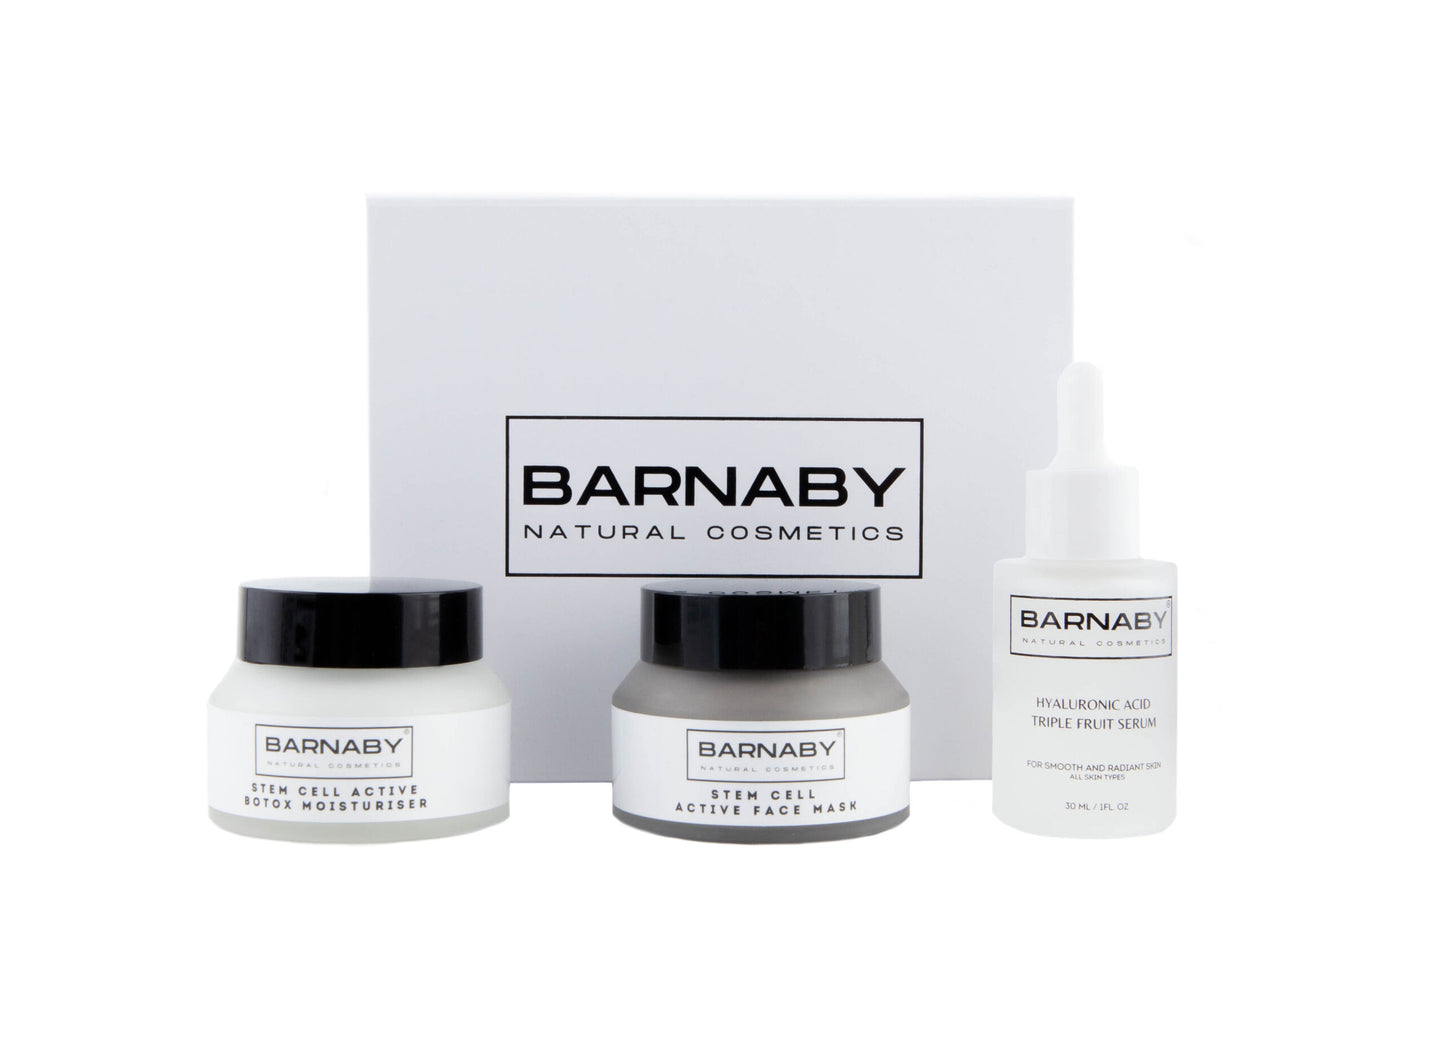 Always Young Skincare Gift Beauty Box - Barnaby Skincare